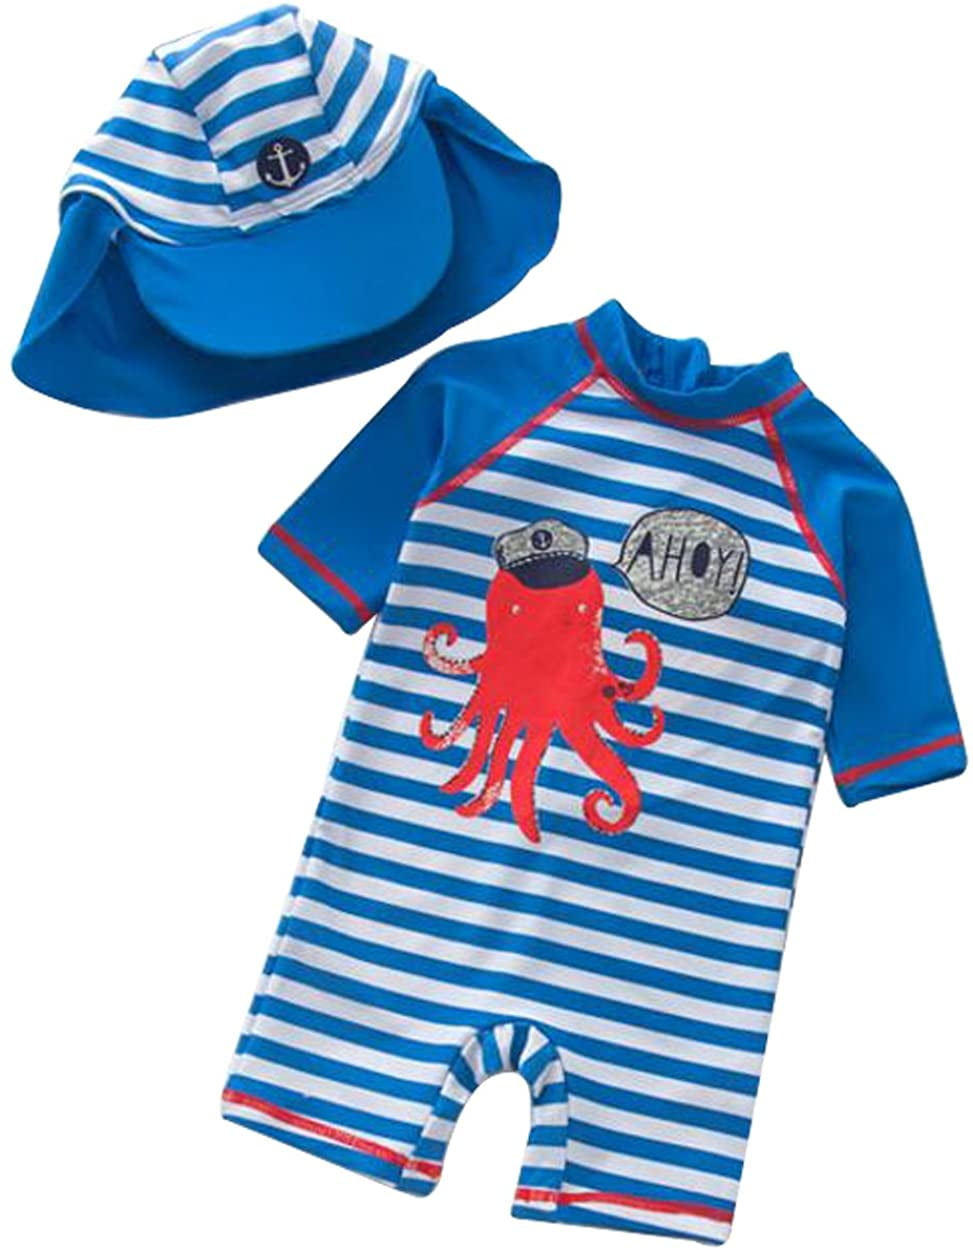 Baby Boy One Piece Long Sleeve Sunsuits Zipper Rash Guard Sun Protection with Swimming Hat 